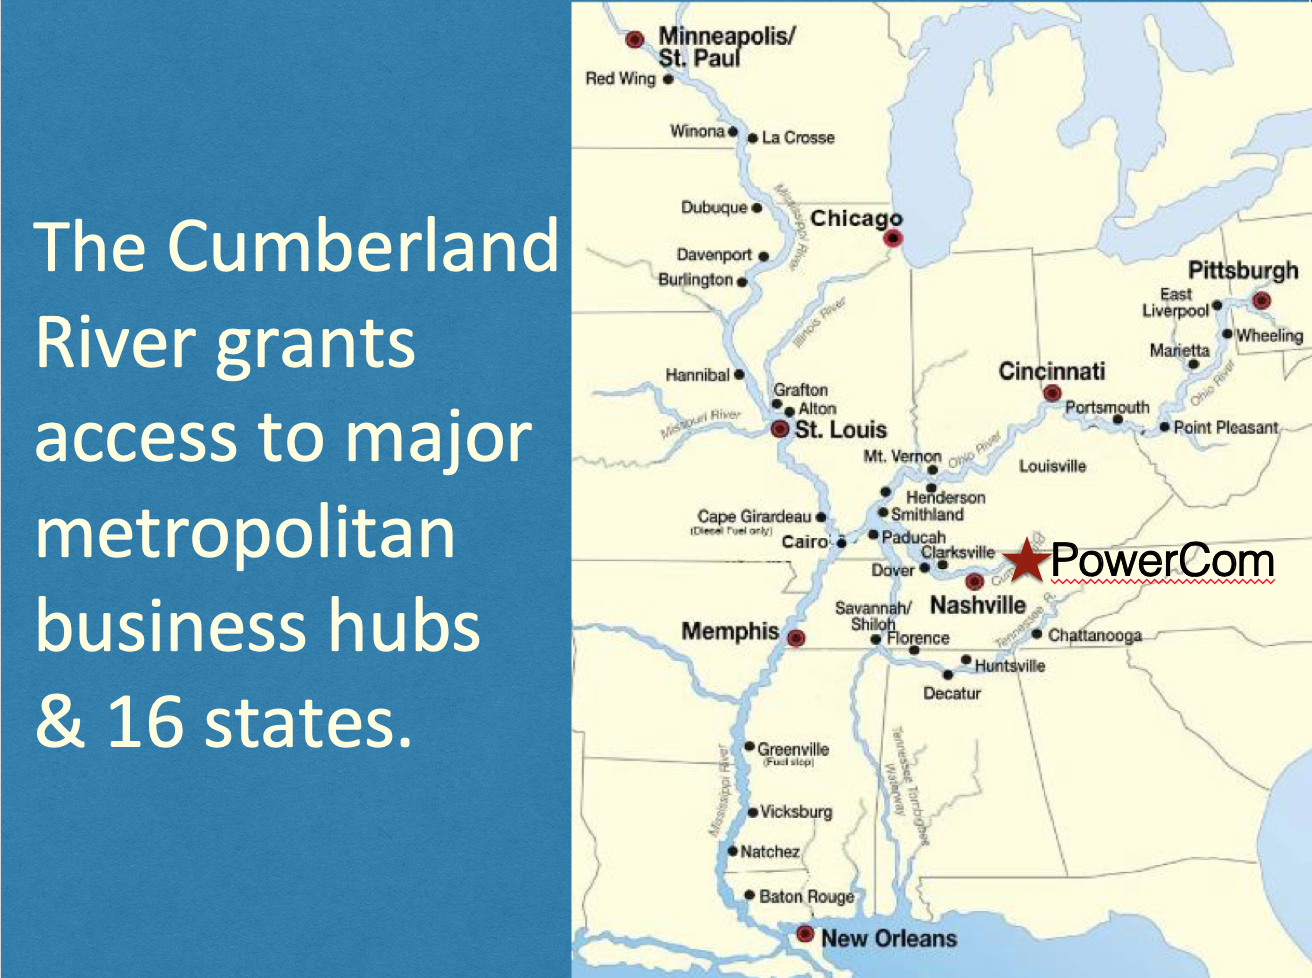 Cumberland River aerea map. The Cumberland River grants access to major metropolitan business hubs and 16 states.